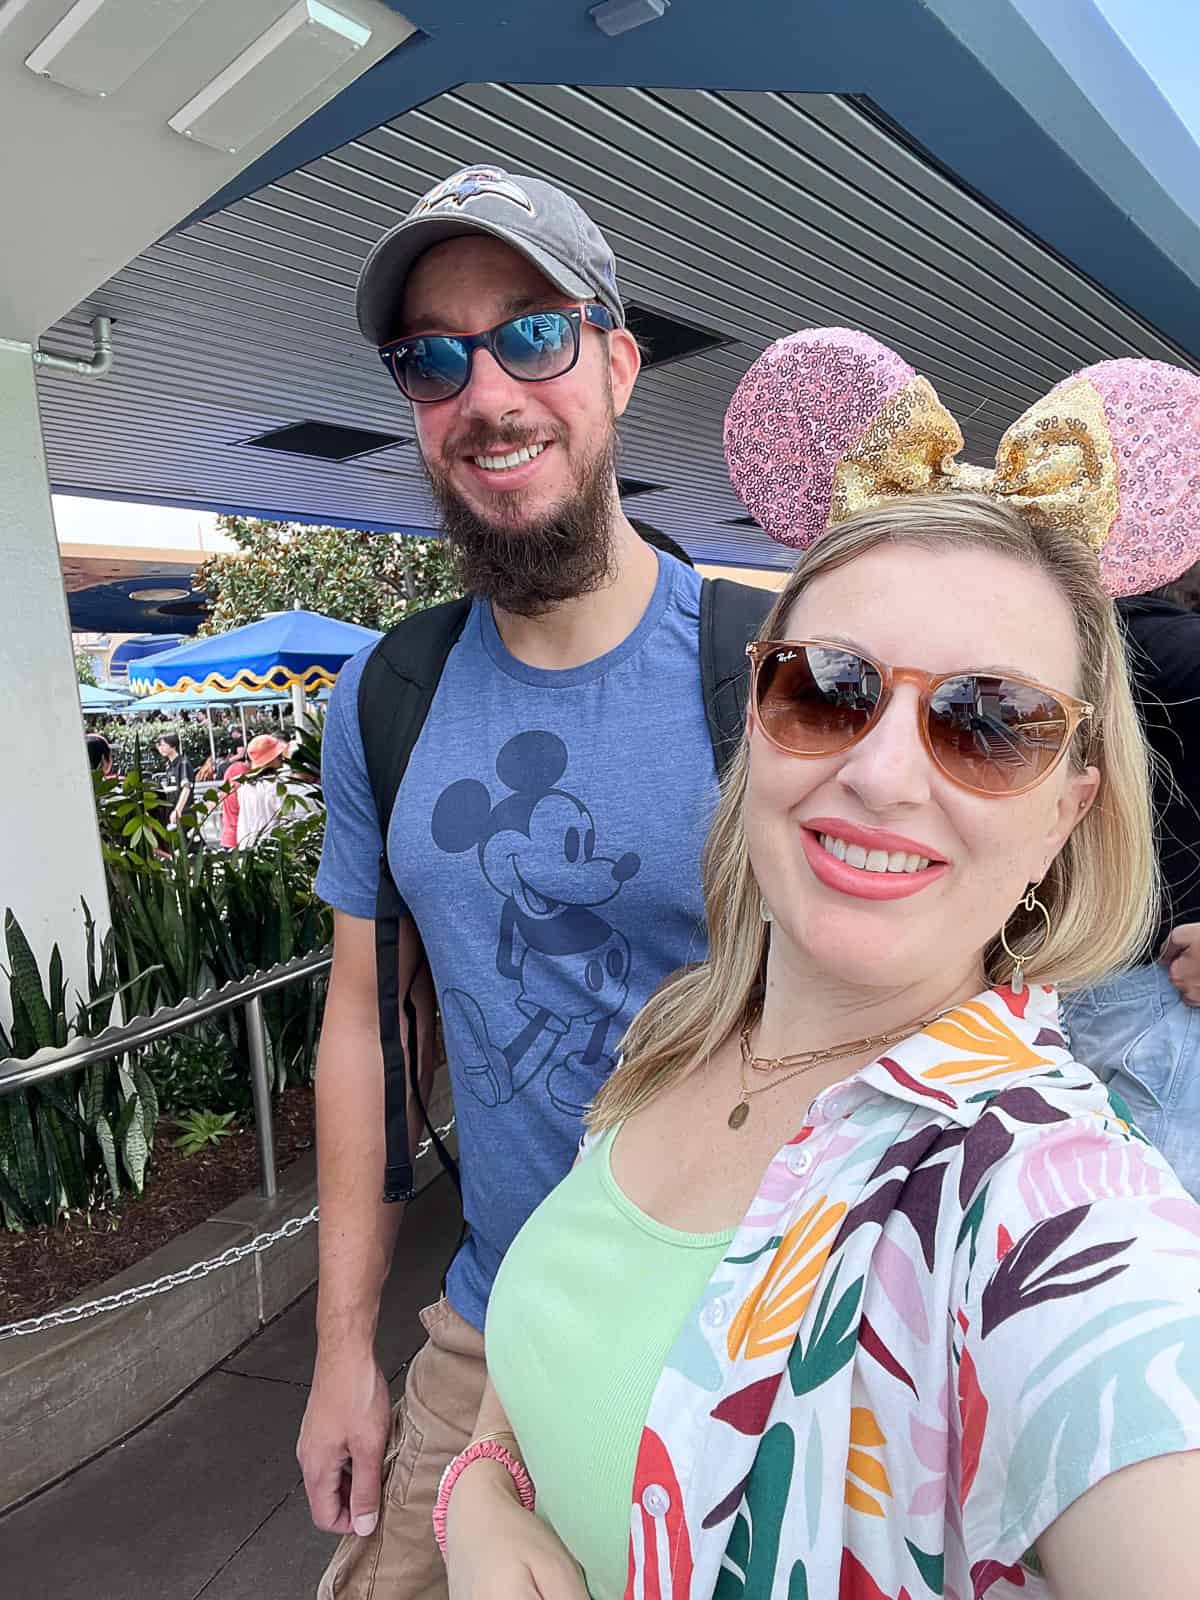 Disney Bloggers wearing Family Disney outfits in the parks